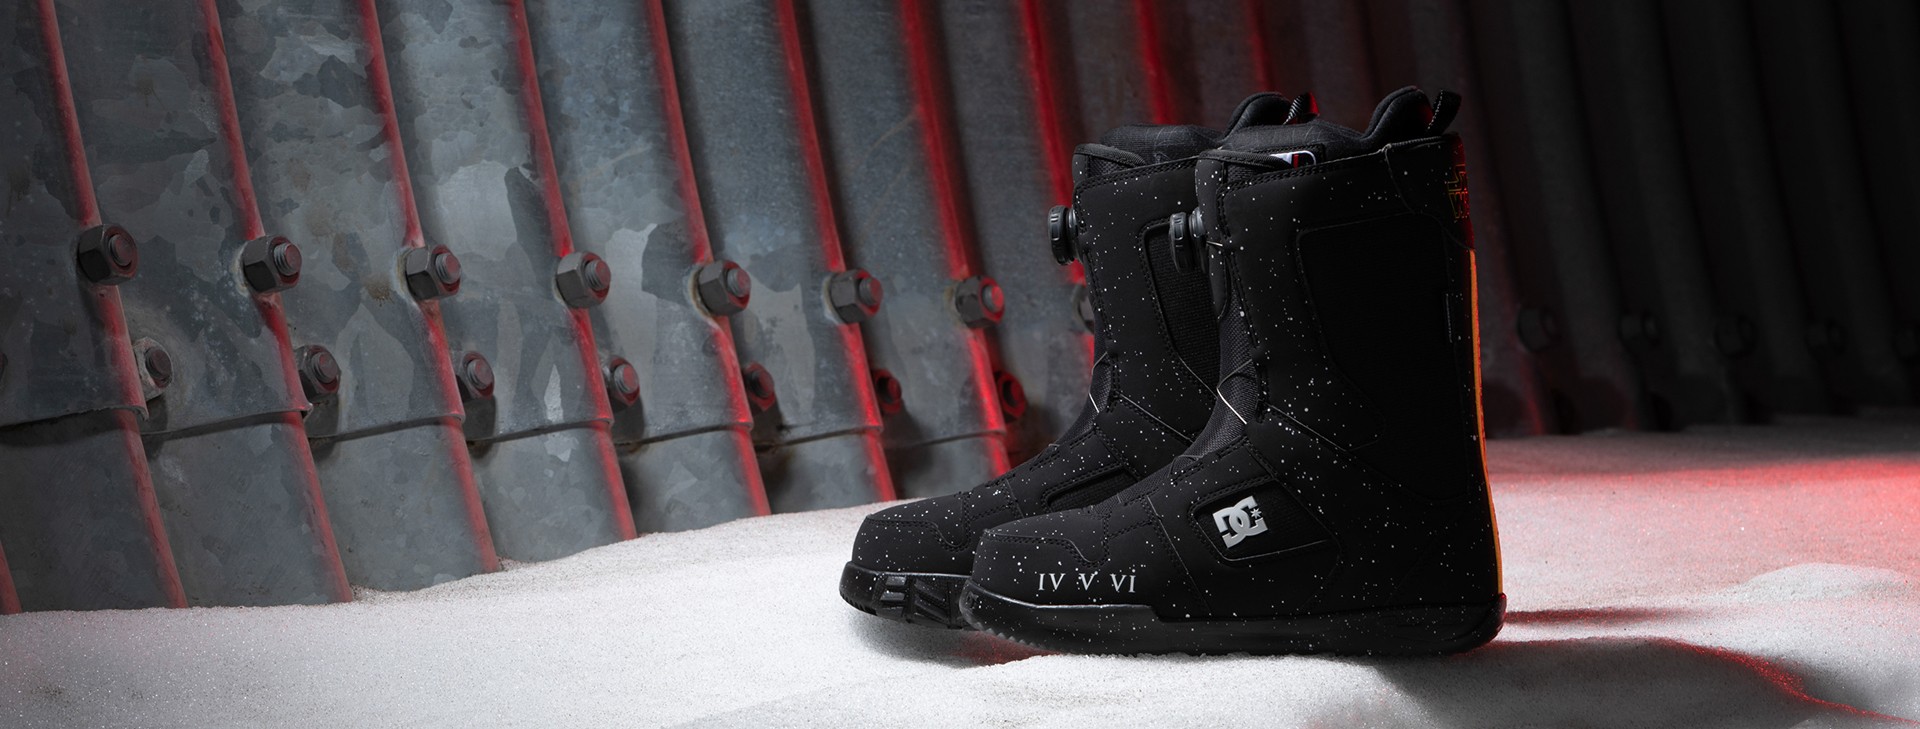 Collab - Men | Snowboarding Shoes Collection for DC the Shop Now Wars Online Star